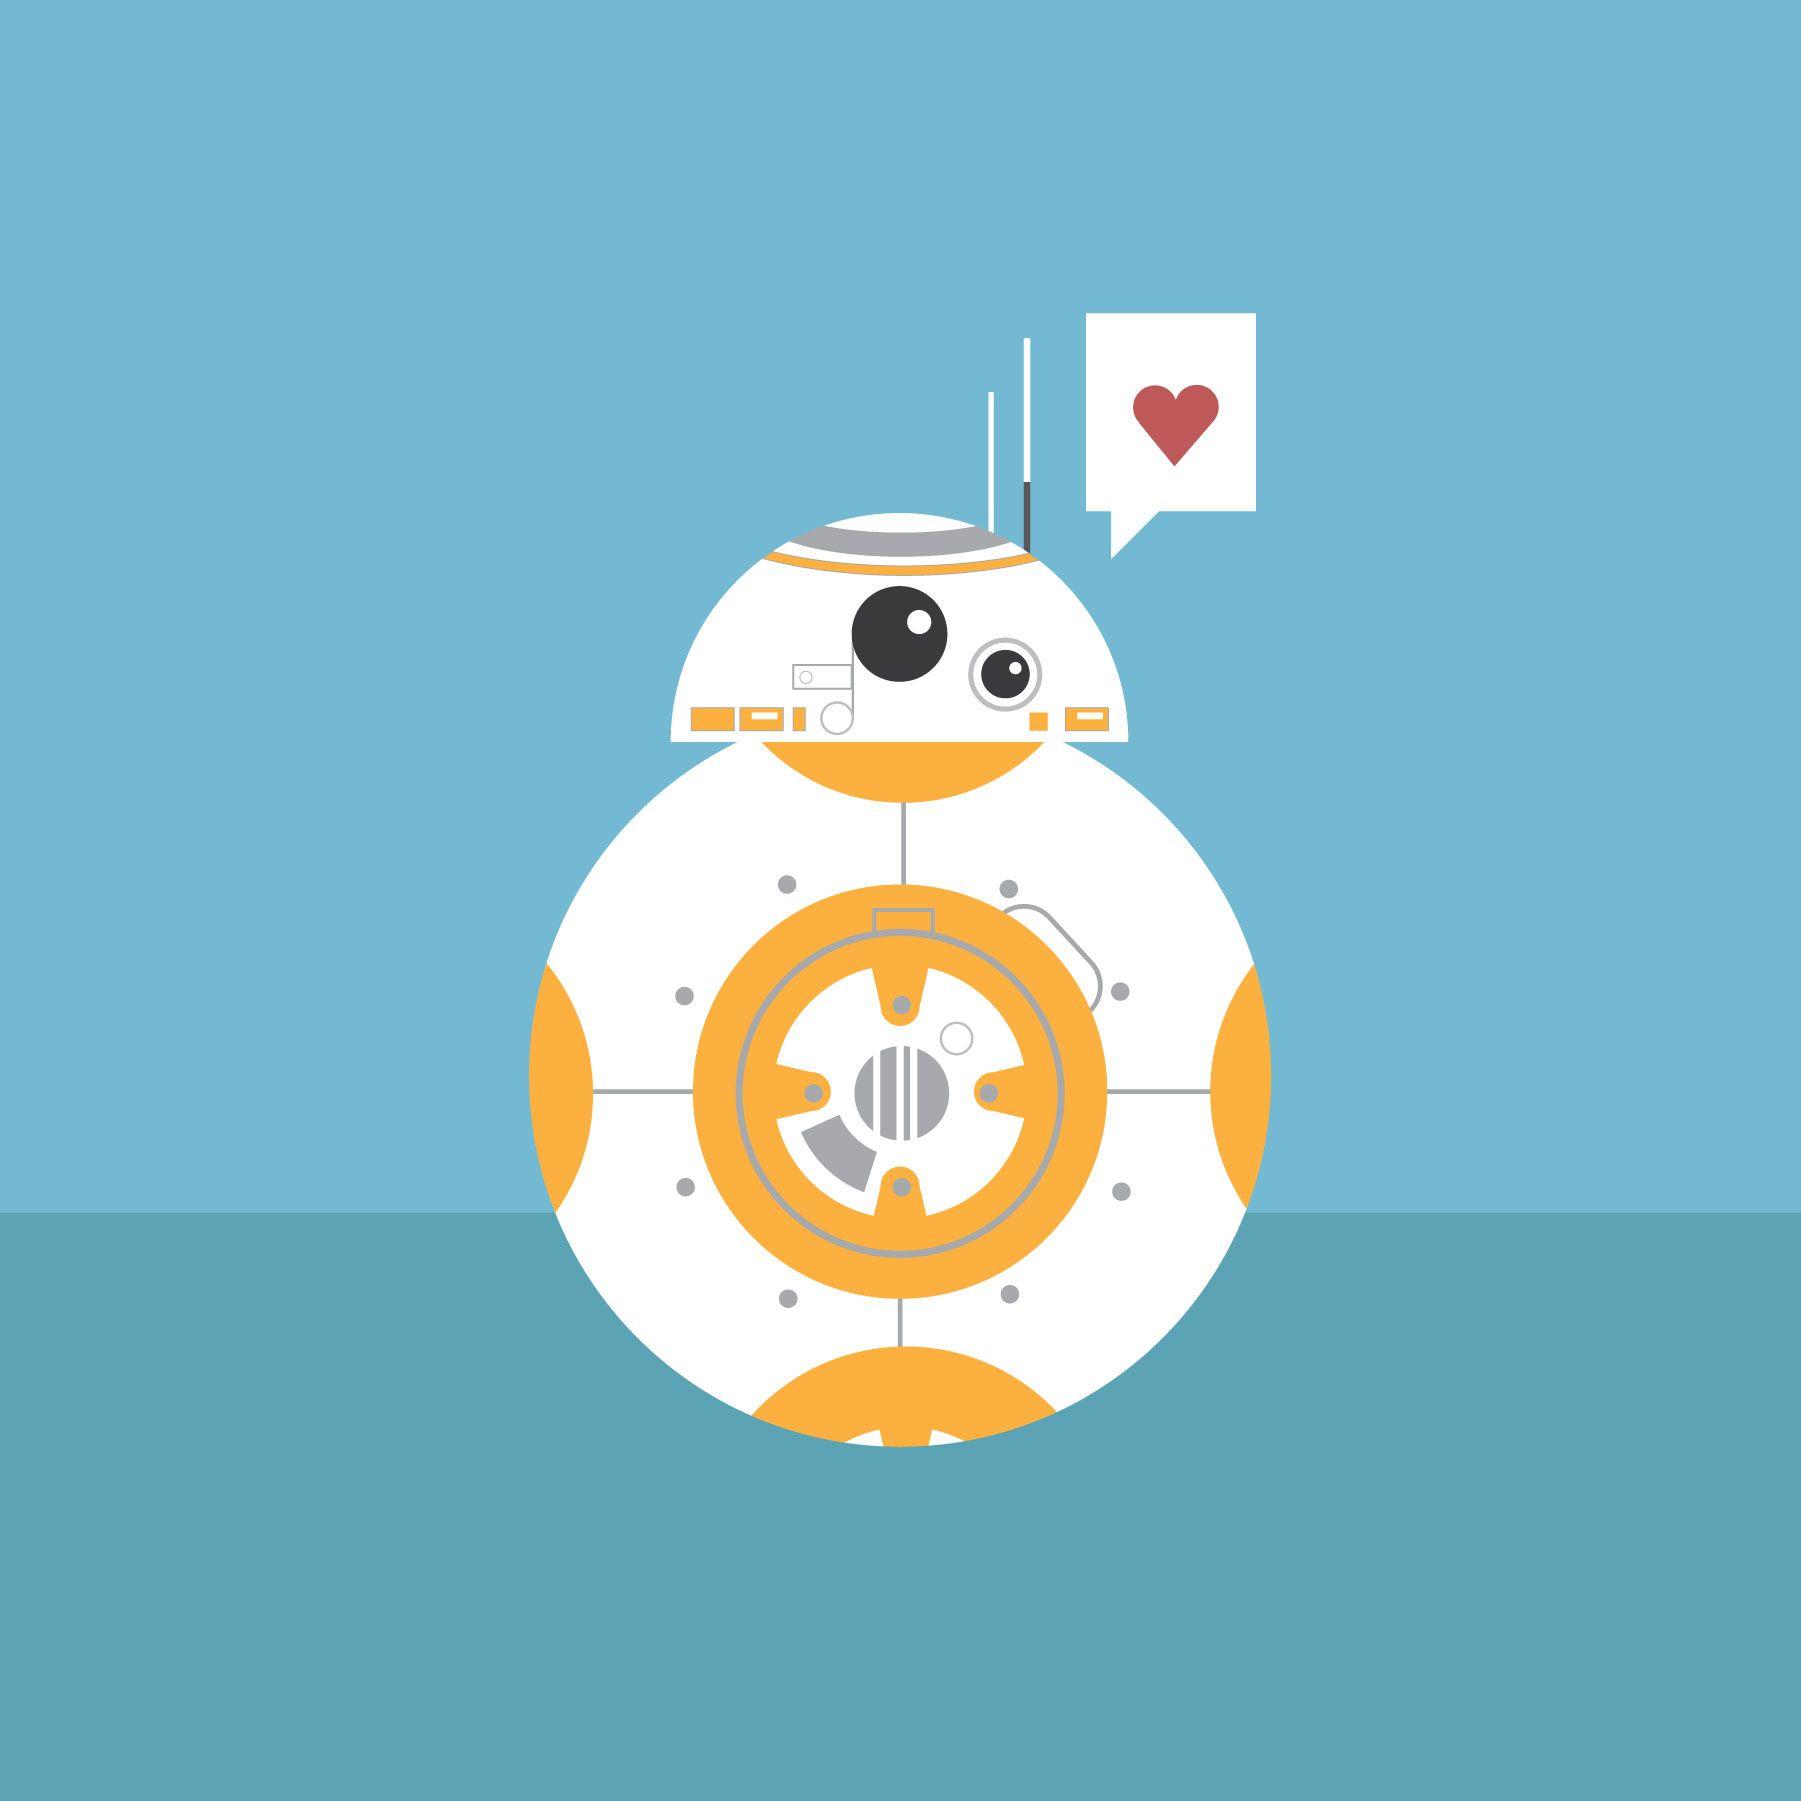 FREE WALLPAPER Go forth and use the force. #bb8 #wallpaper